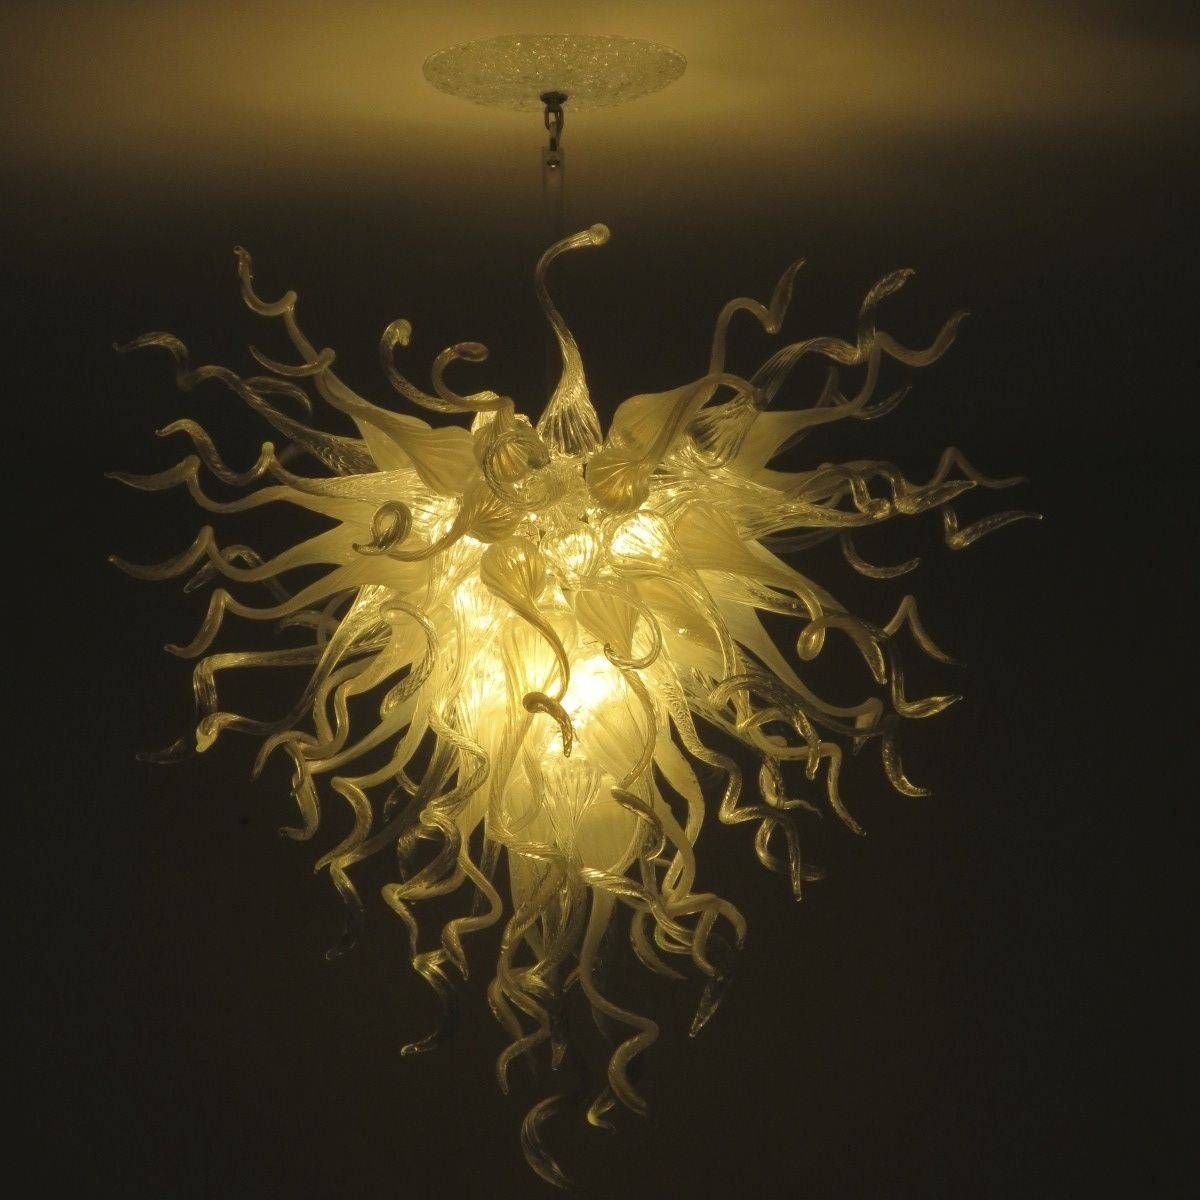 Buy A Handmade Blown Glass Chandelier – White Chandelier – Art Intended For Jellyfish Lights Shades (View 11 of 15)